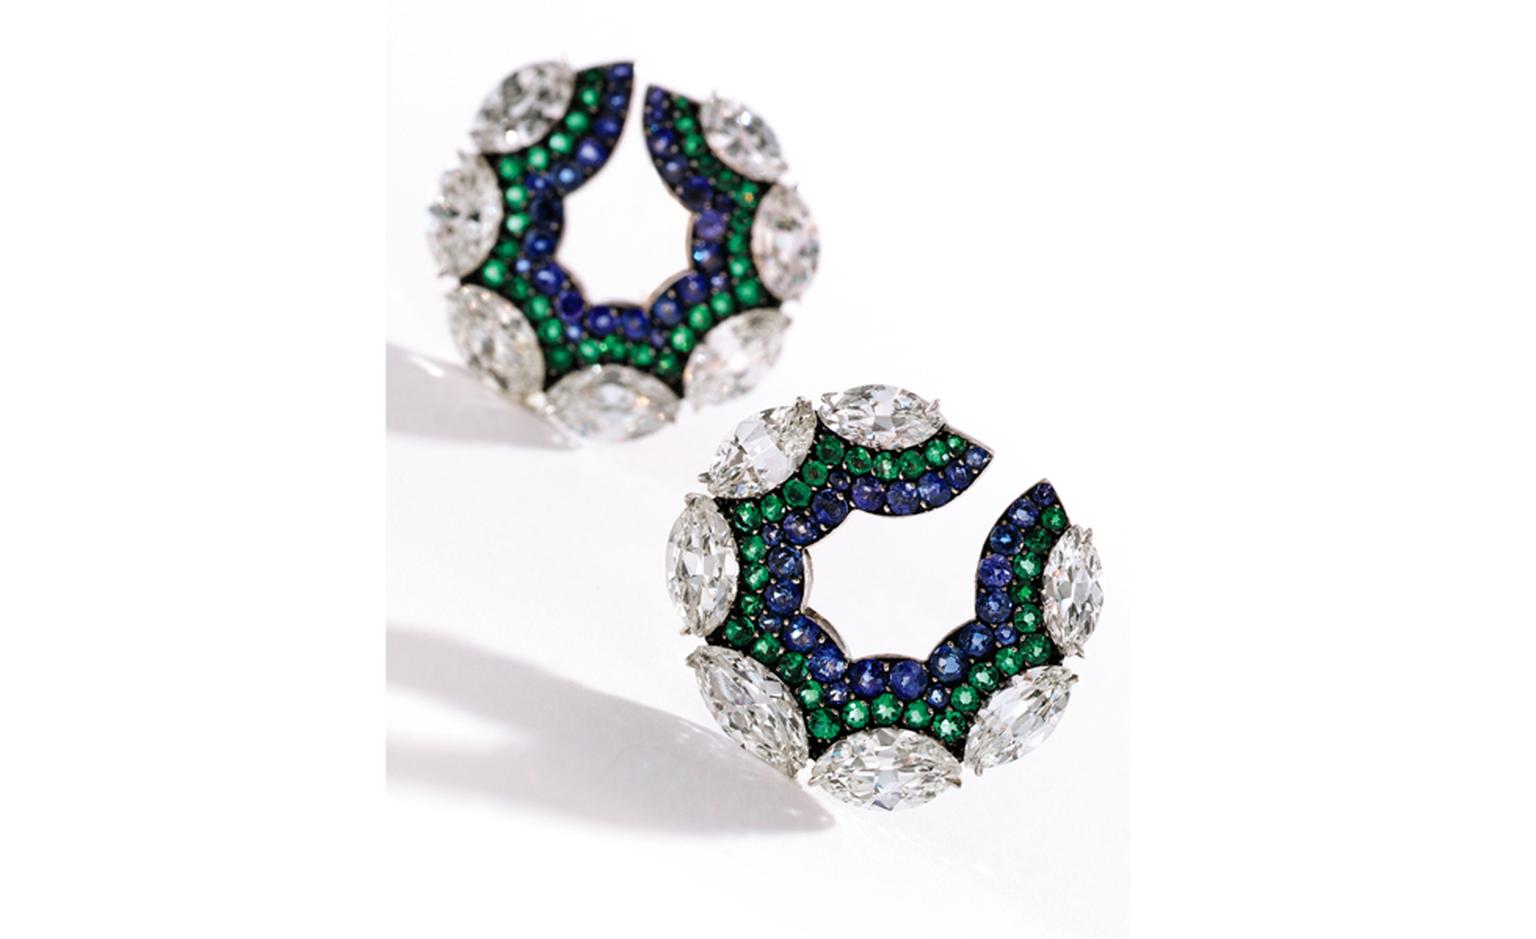 Lot 352 Pair of 18 Karat Gold, Silver, Diamond, Sapphire and Emerald Earclips, JAR, Paris, 1998 Est. $100/200,000. SOLD FOR $326,500